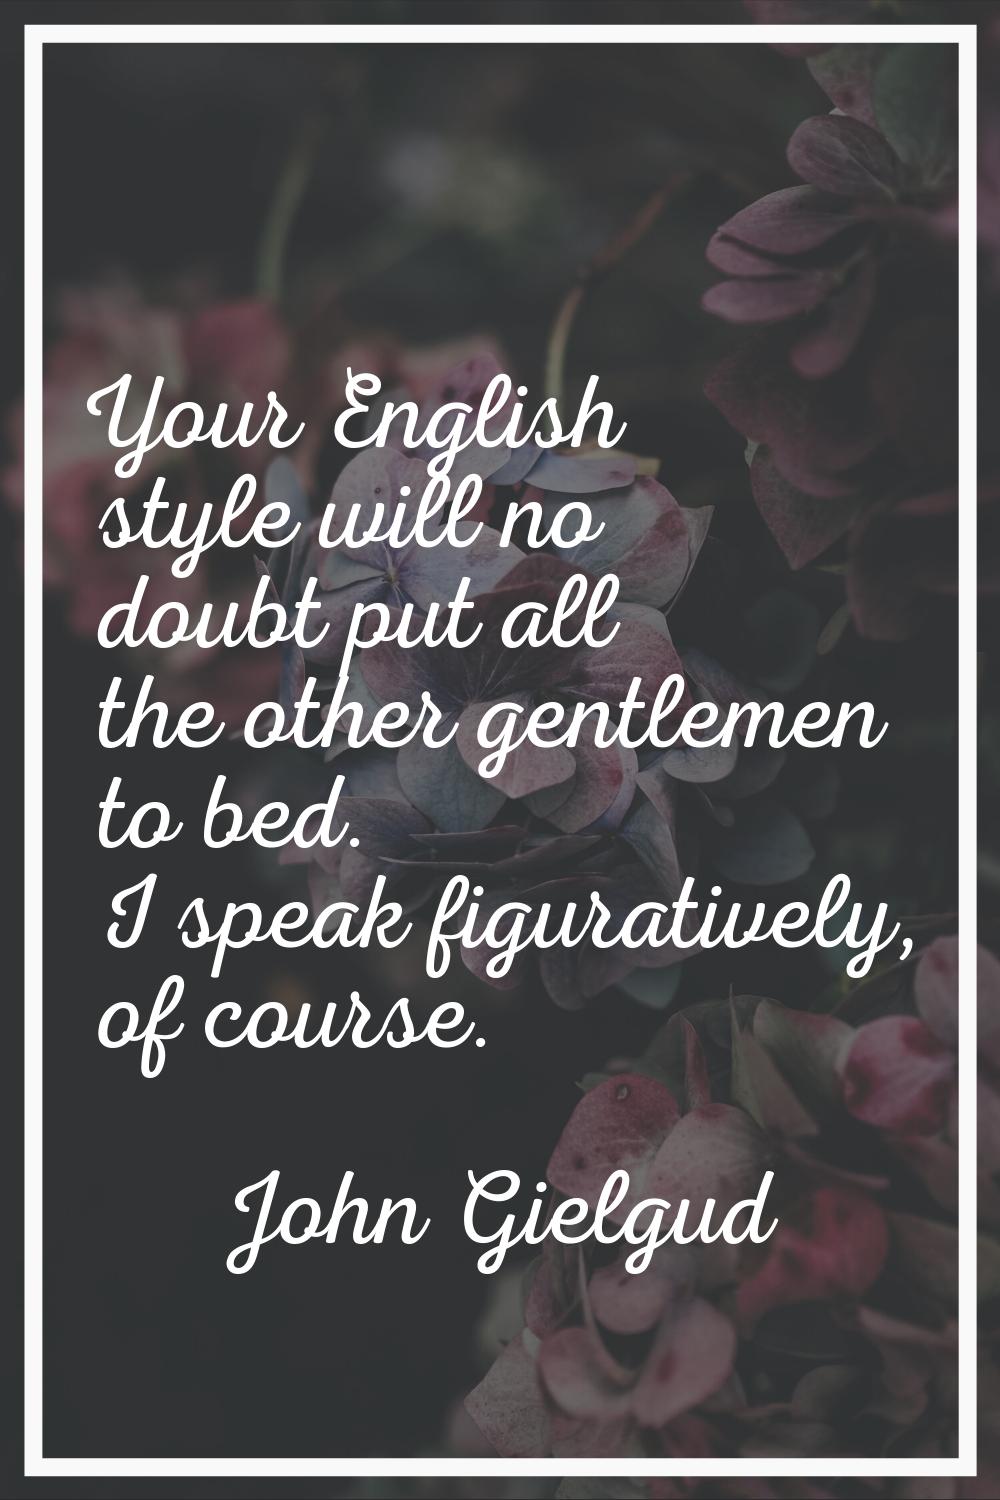 Your English style will no doubt put all the other gentlemen to bed. I speak figuratively, of cours